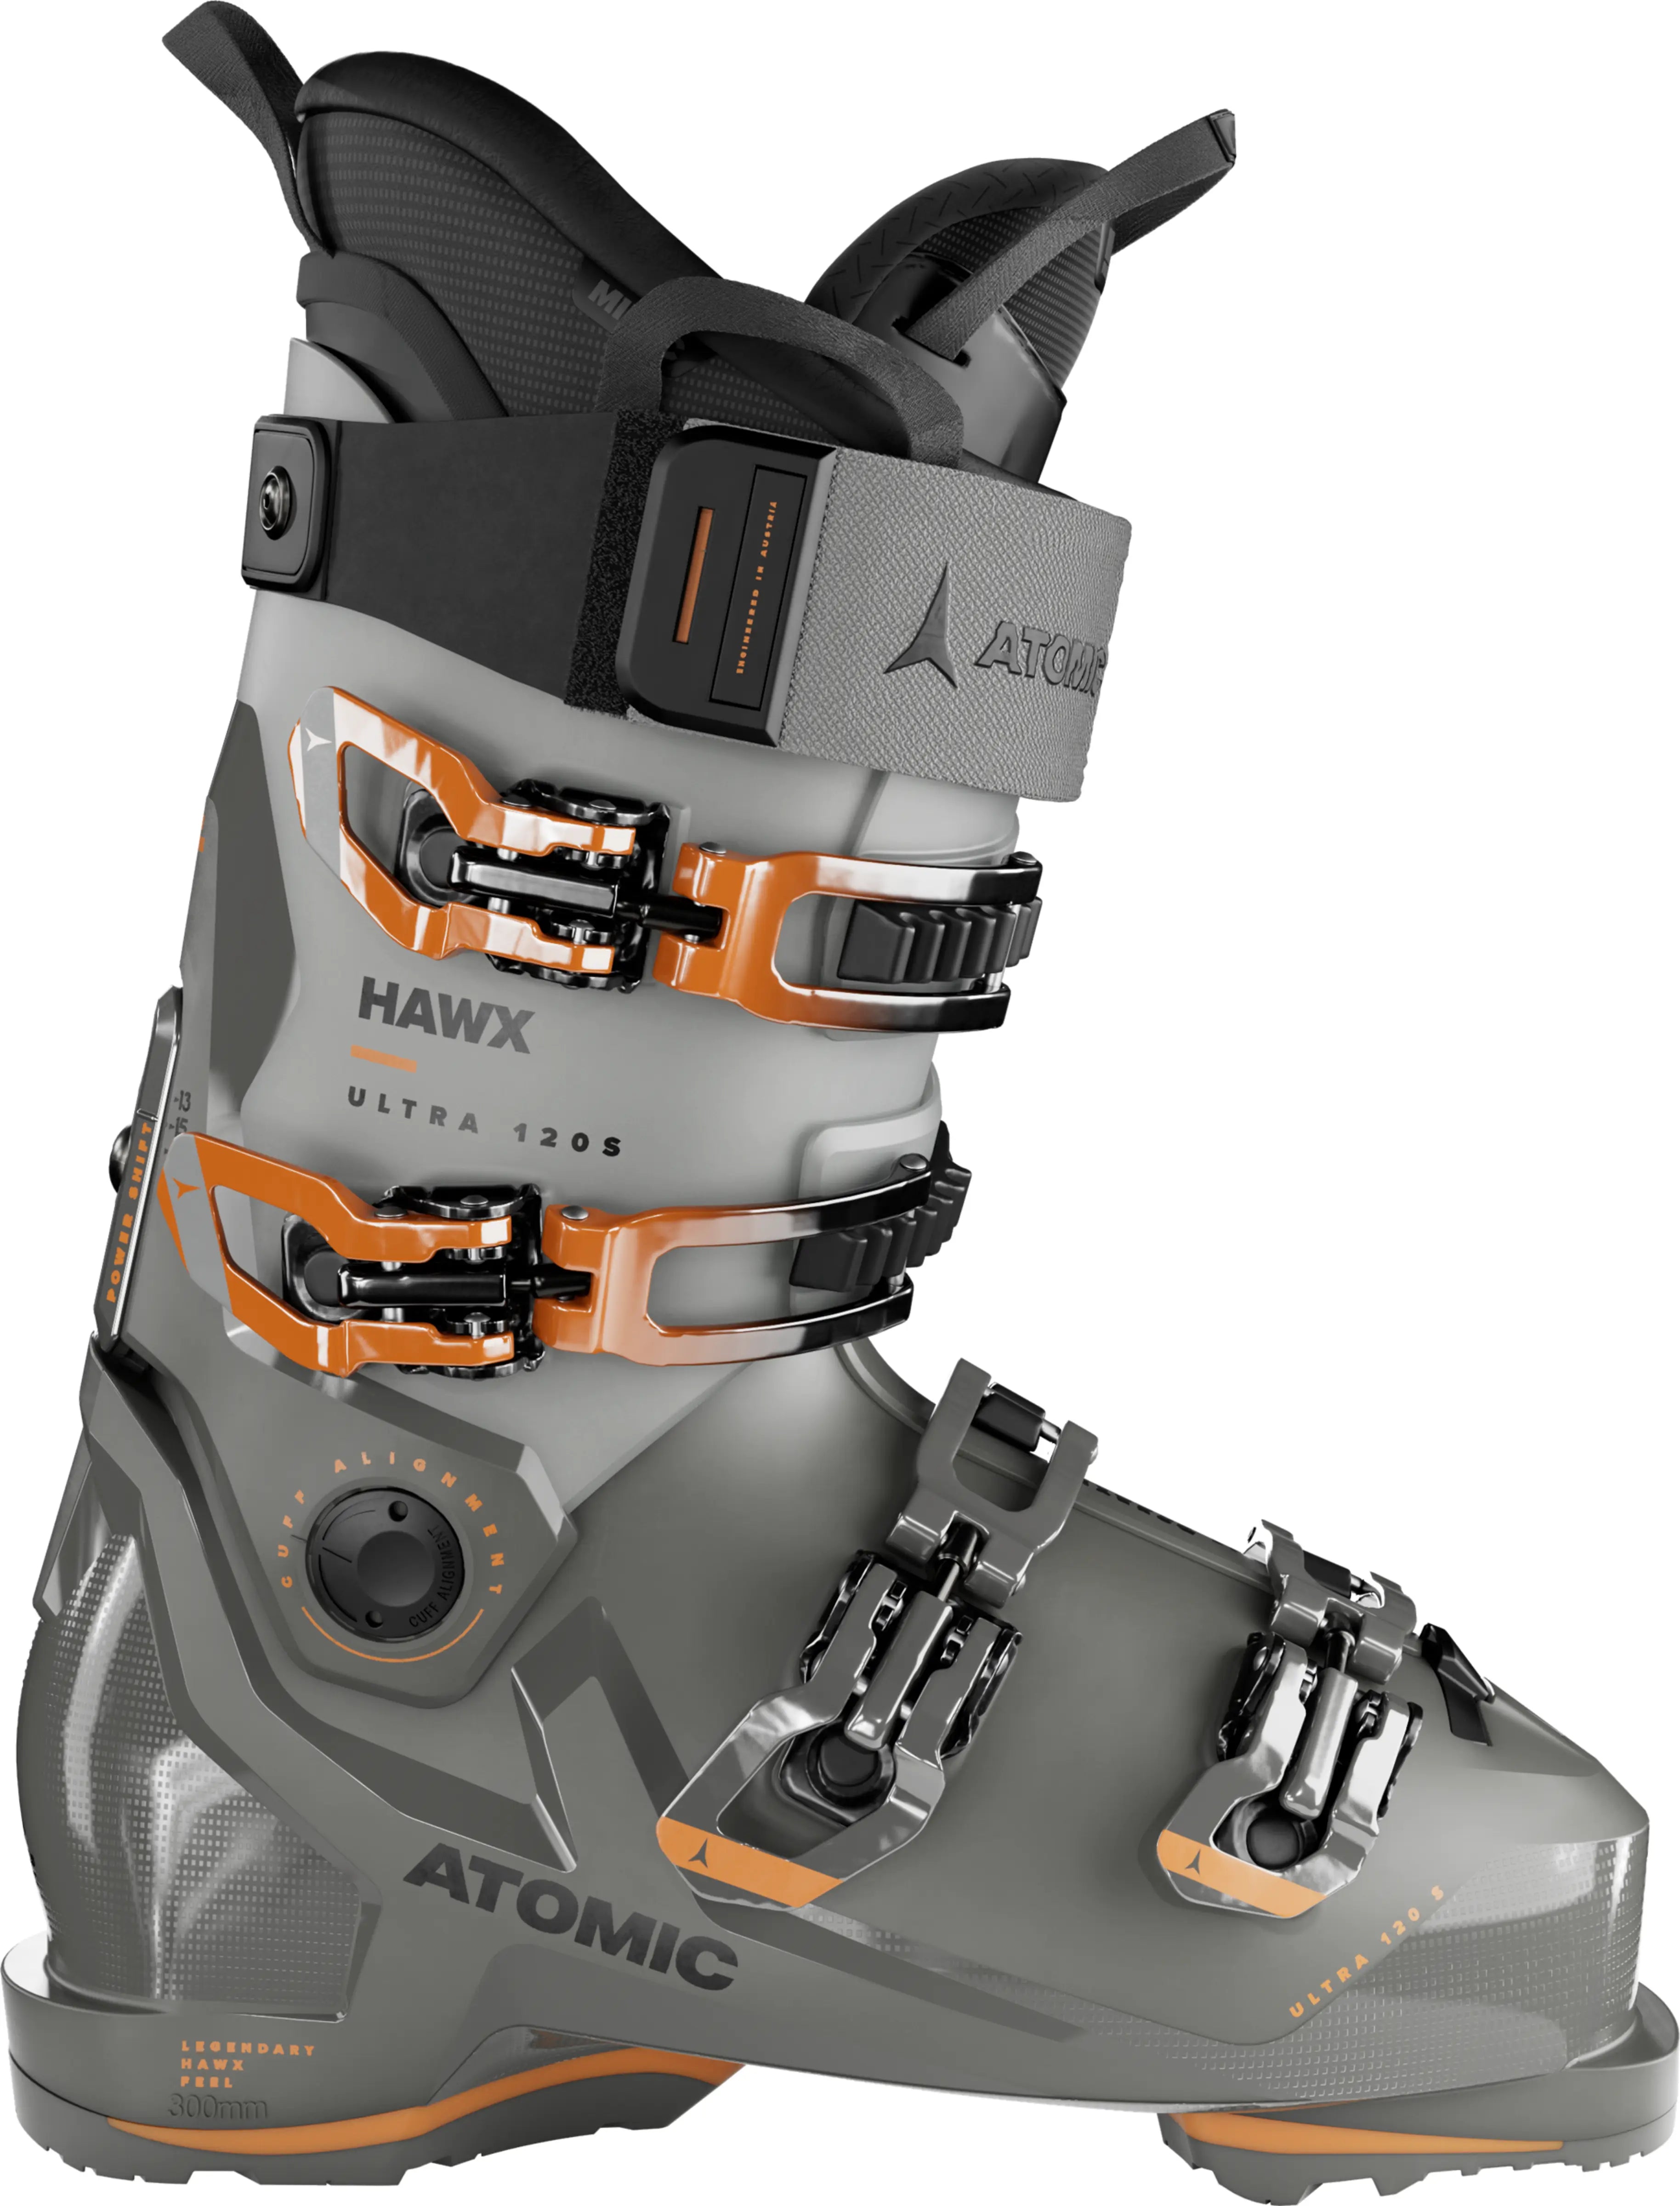 The Atomic Hawx Ultra 120 S GW is a super comfortable and strong all-mountain ski boot with a medium flex and narrow fit.